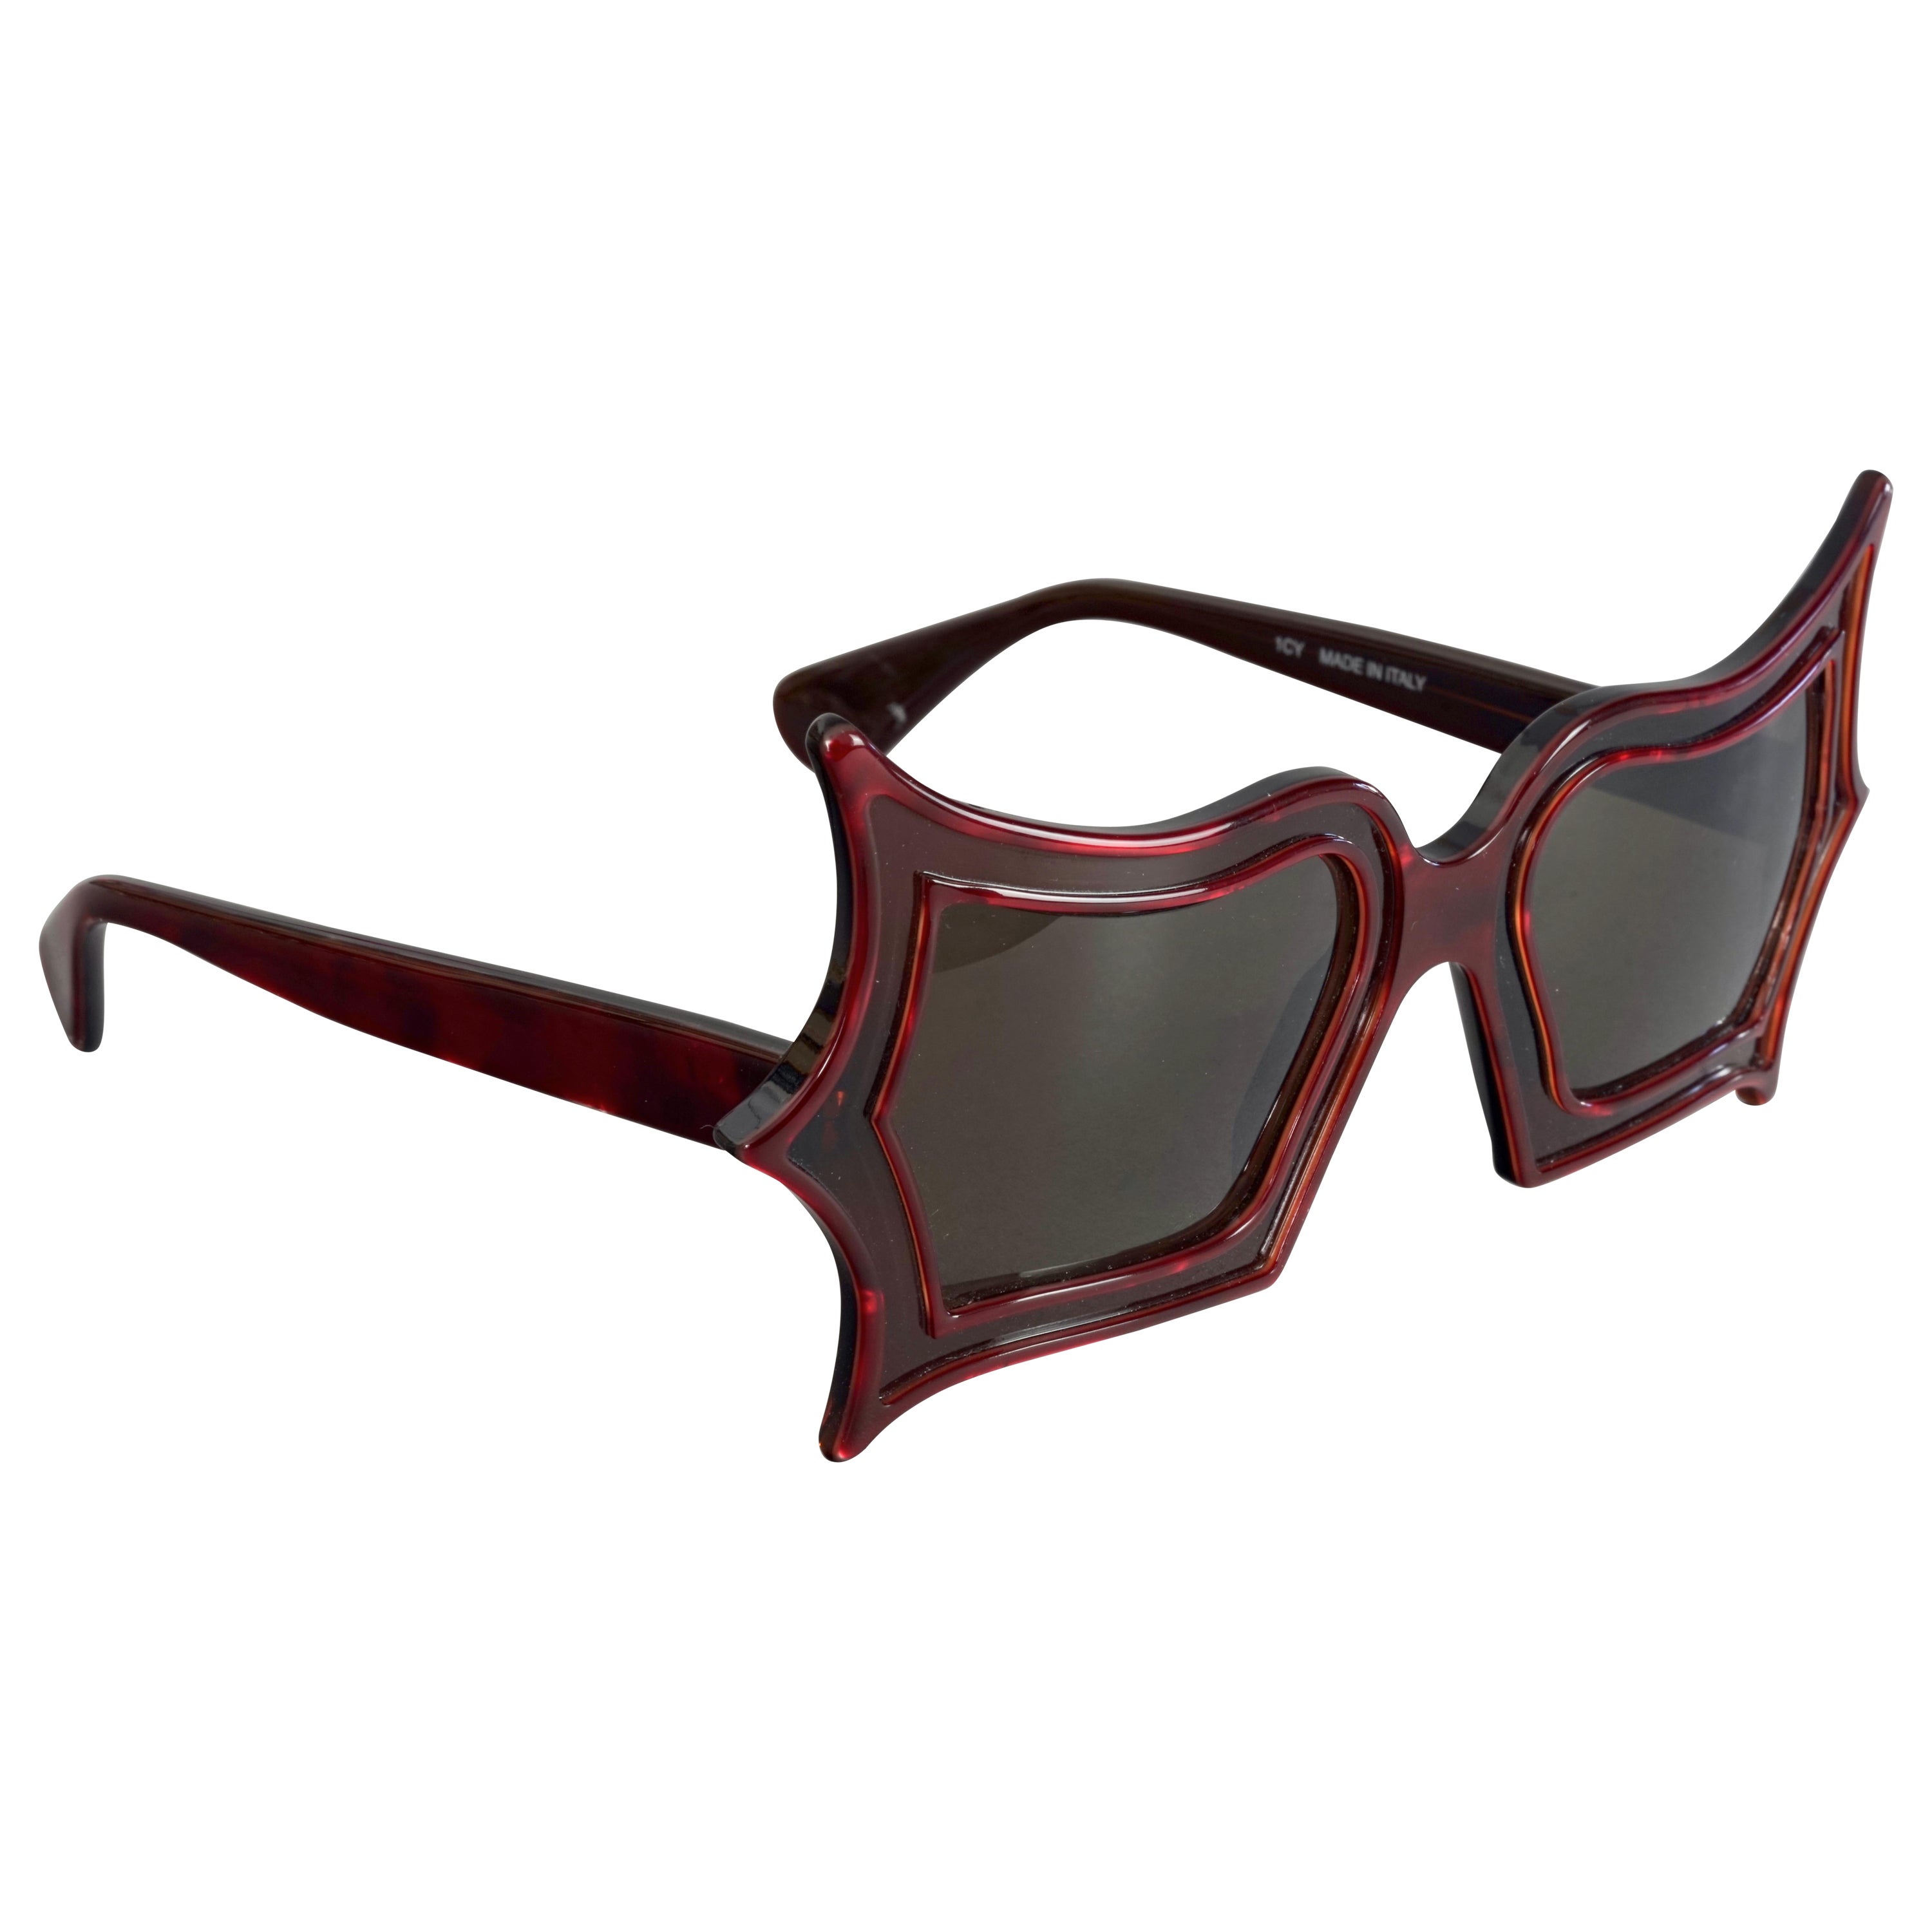 SAFILO Tribute to "PEGGY GUGGENHEIM" Limited Edition Surreal Red Sunglasses